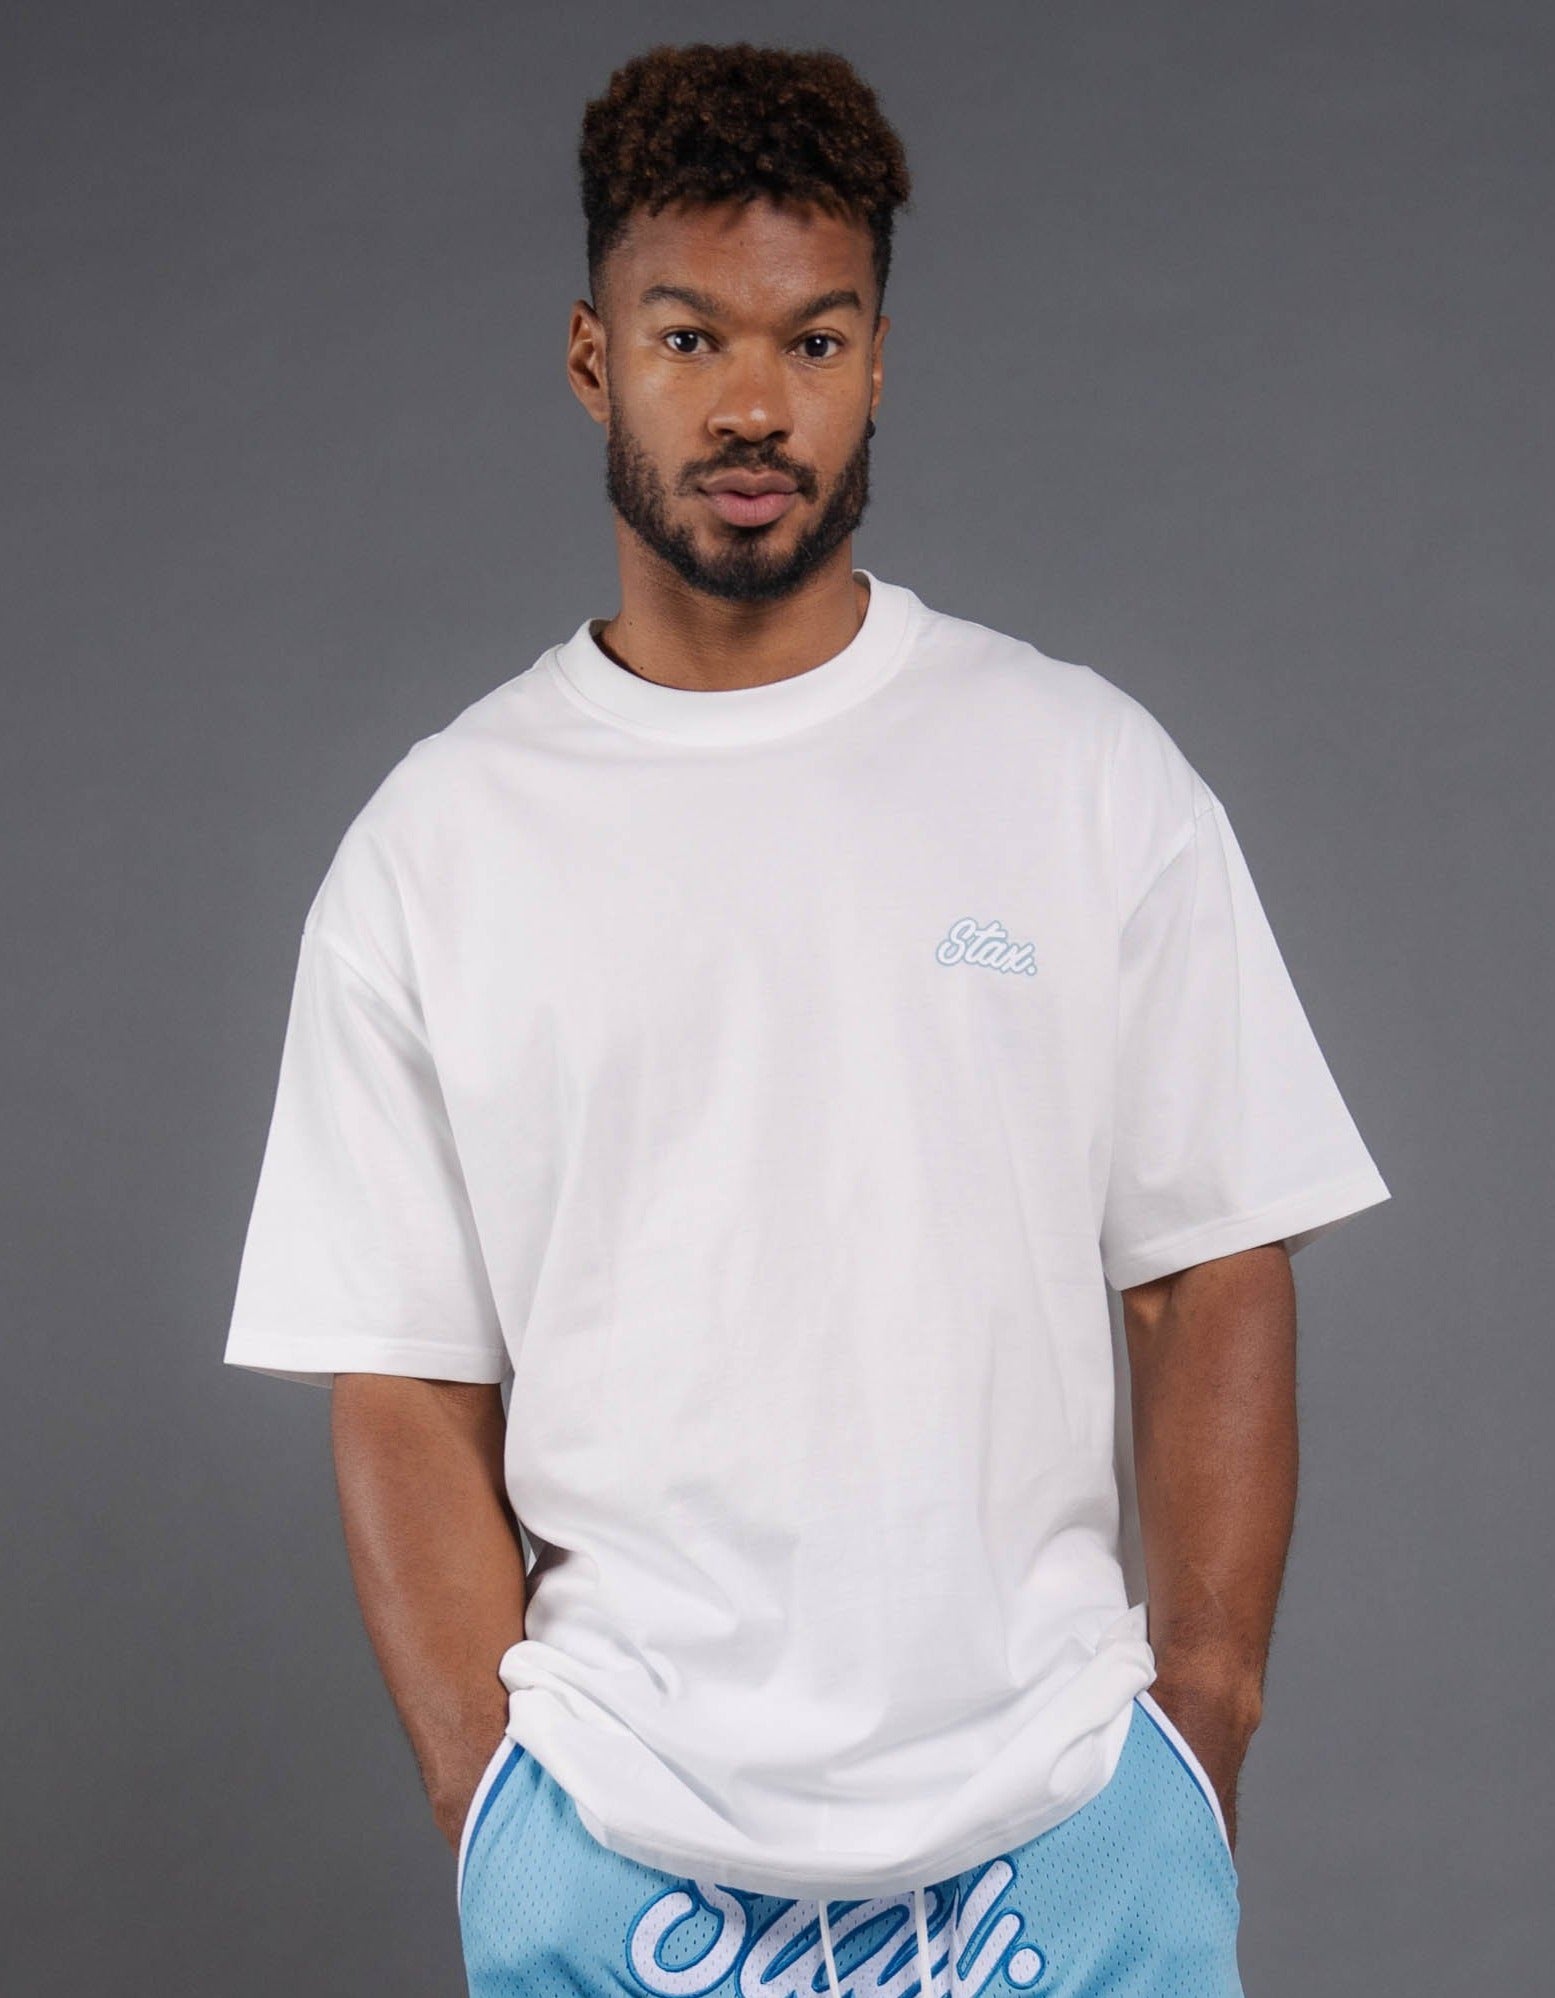 copy-of-stax-court-drip-basketball-tee-white-blue